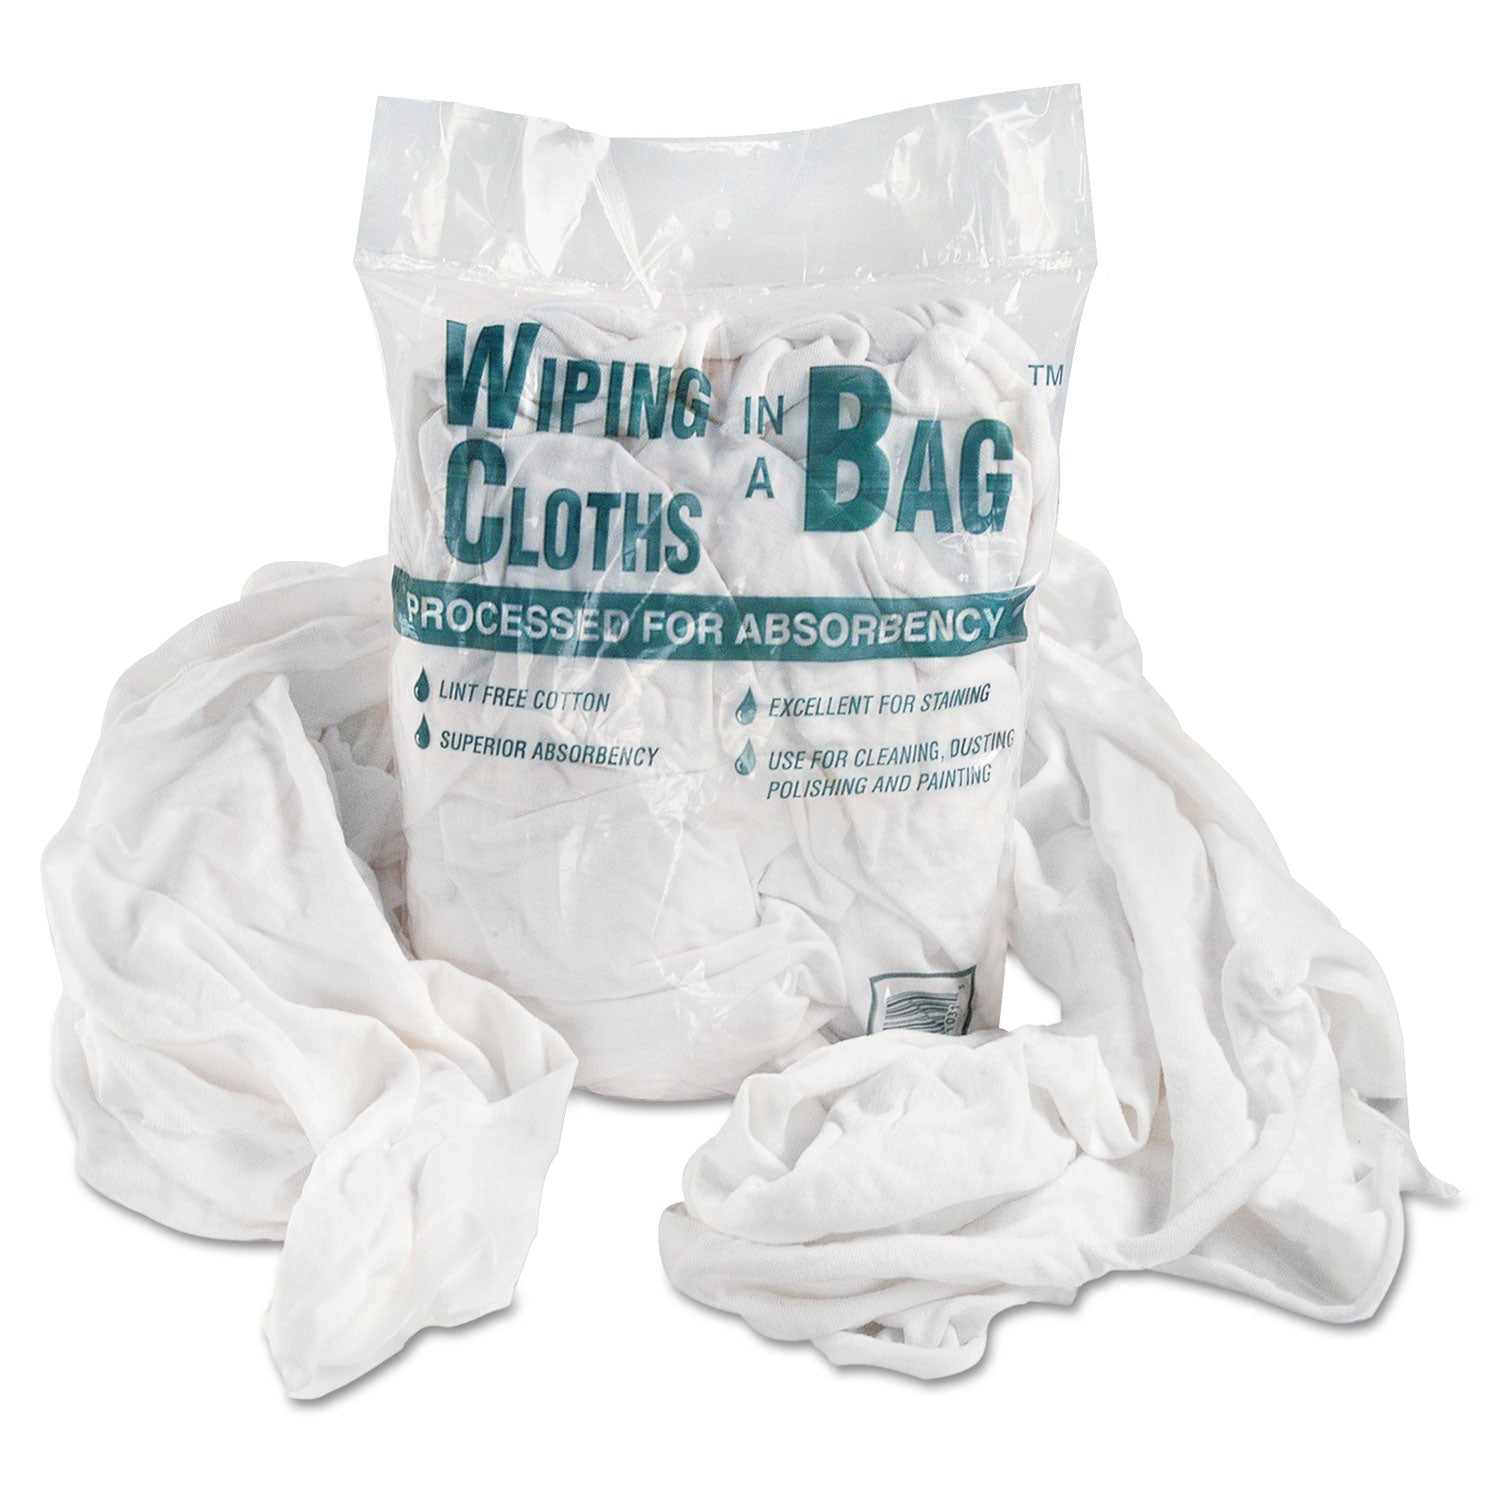 Bag-A-Rags Reusable Wiping Cloths, Cotton, White, 1 lb Pack - 